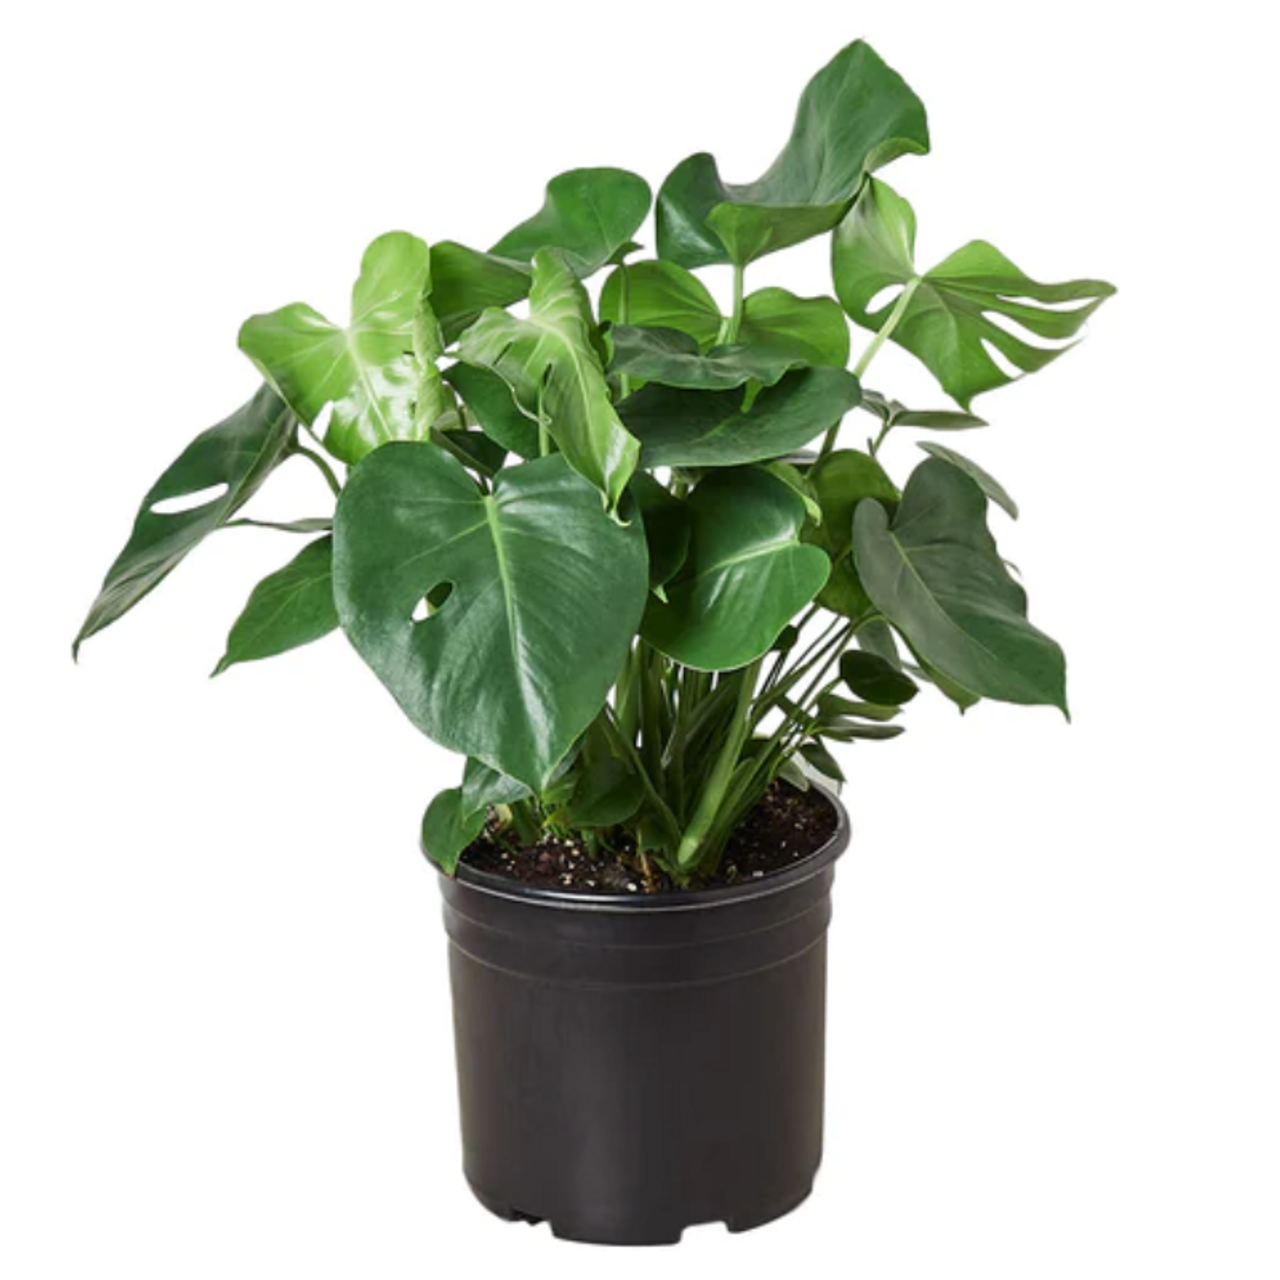 FLOWERWOOD 2.5 Qt. Split Leaf Philodendron - Live Evergreen Shrub with  Large Glossy Green Foliage 4671Q - The Home Depot